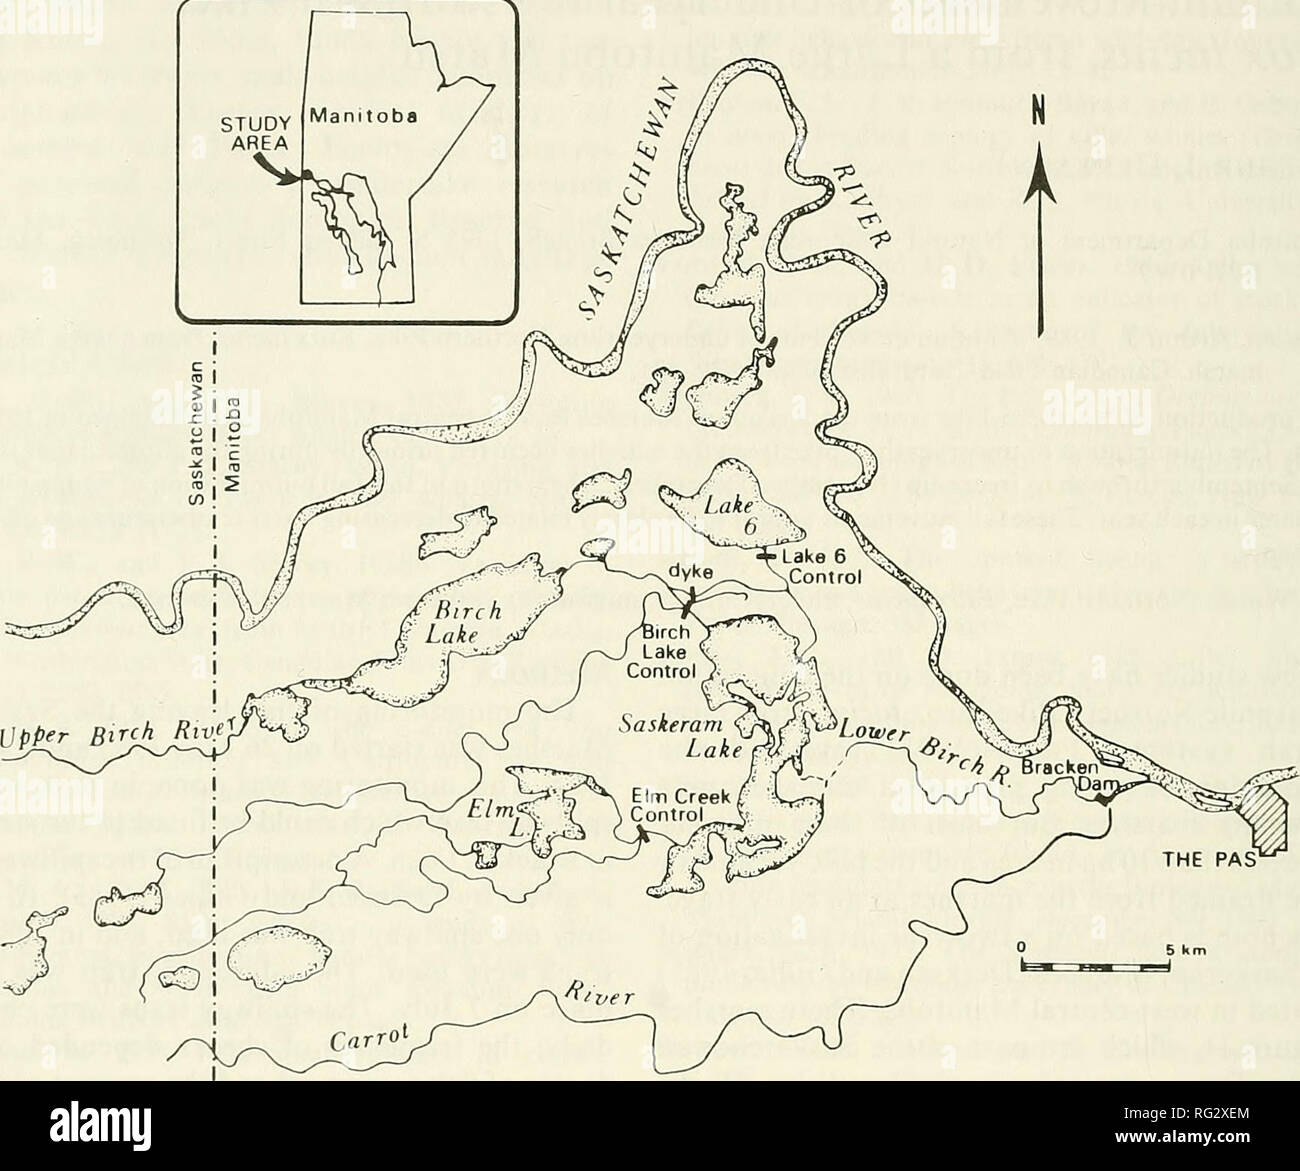 . The Canadian field-naturalist. 430 The Canadian Field-Naturalist Vol. 103. Figure 1. The Saskeram Marshes, bounded by the Saskatchewan and Carrot rivers, in west-central Manitoba. pike could be readily distinguished from yearling and older pike on the basis of size alone. This was confirmed by observations on the seasonal growth of young-of-the-year pike. In the two years of study, young-of-the-year pike constituted 97% of the combined annual catches of pike. The daily catches of underyearling pike in each year were grouped into 5-day periods and expressed as means. These means were plotted  Stock Photo